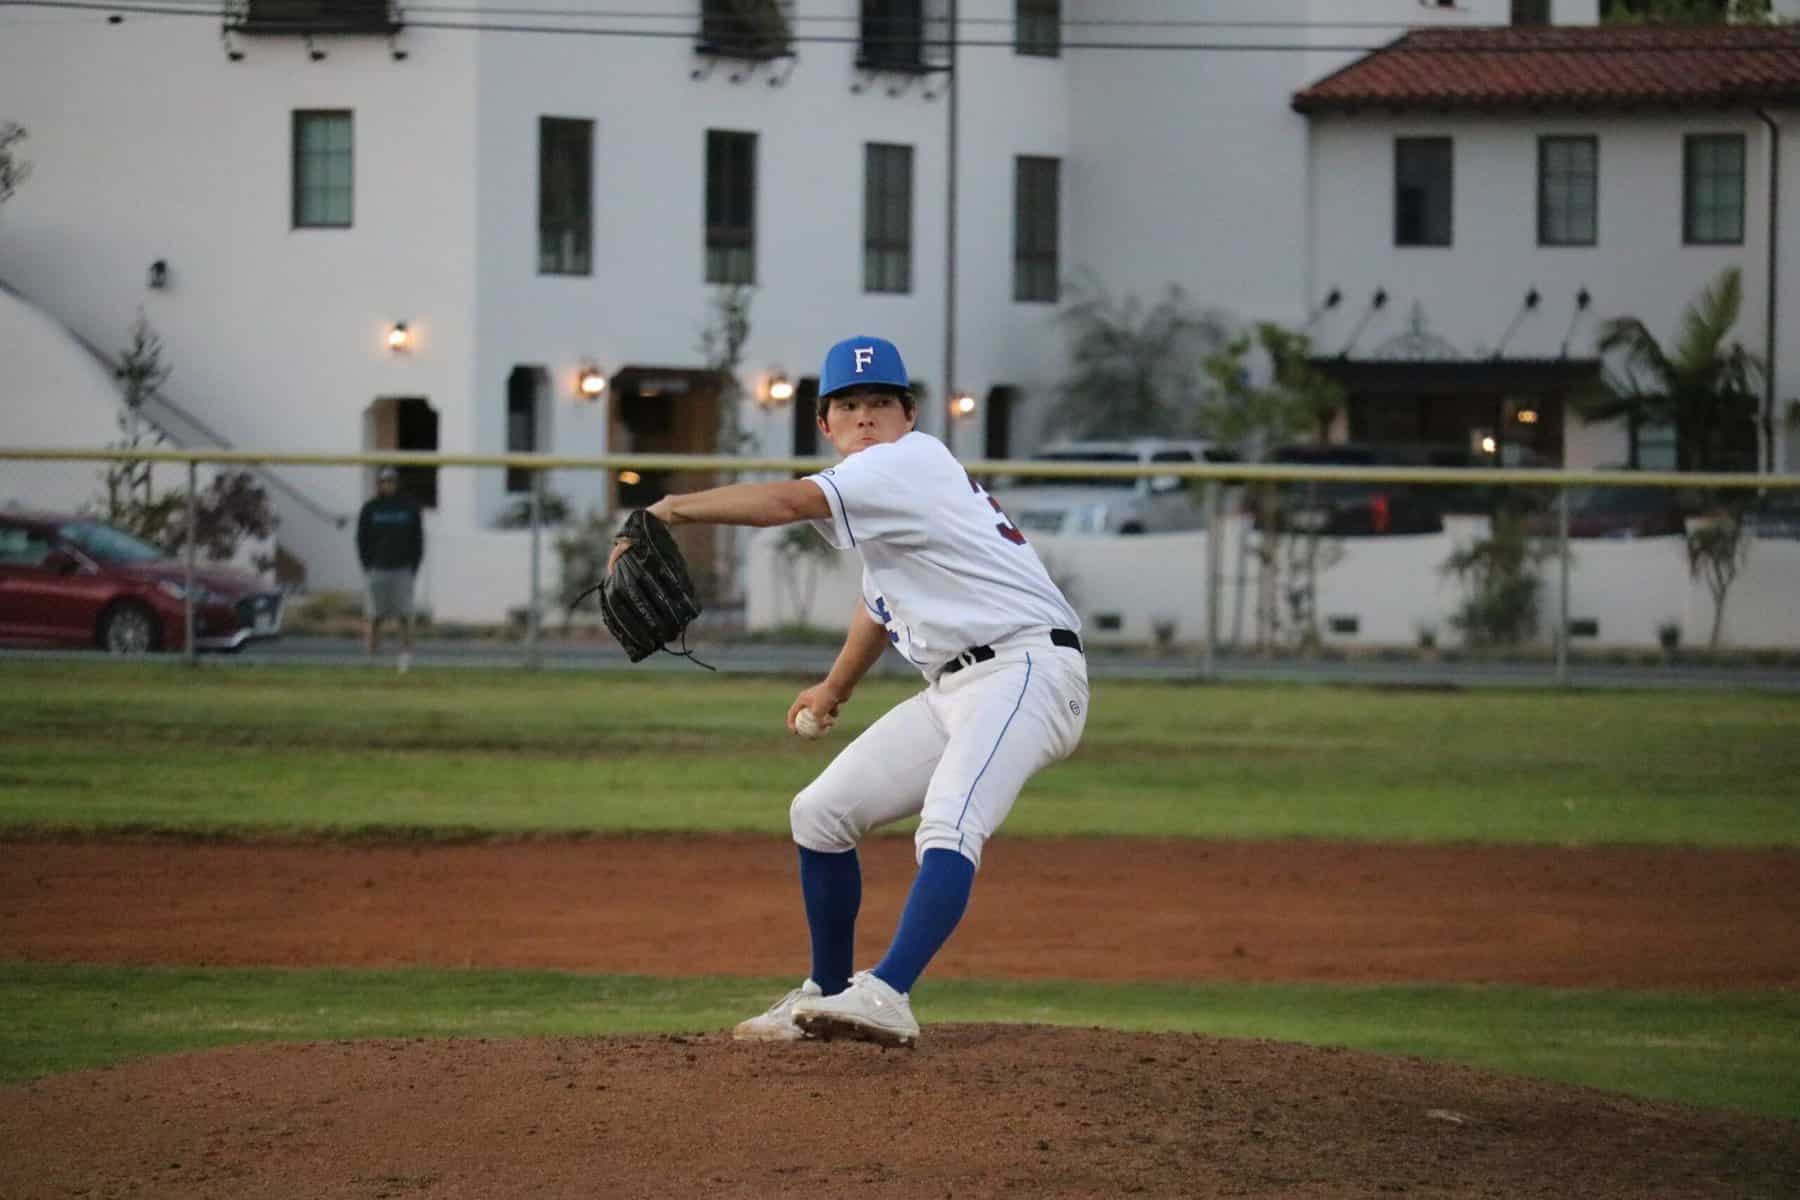 Player pitching